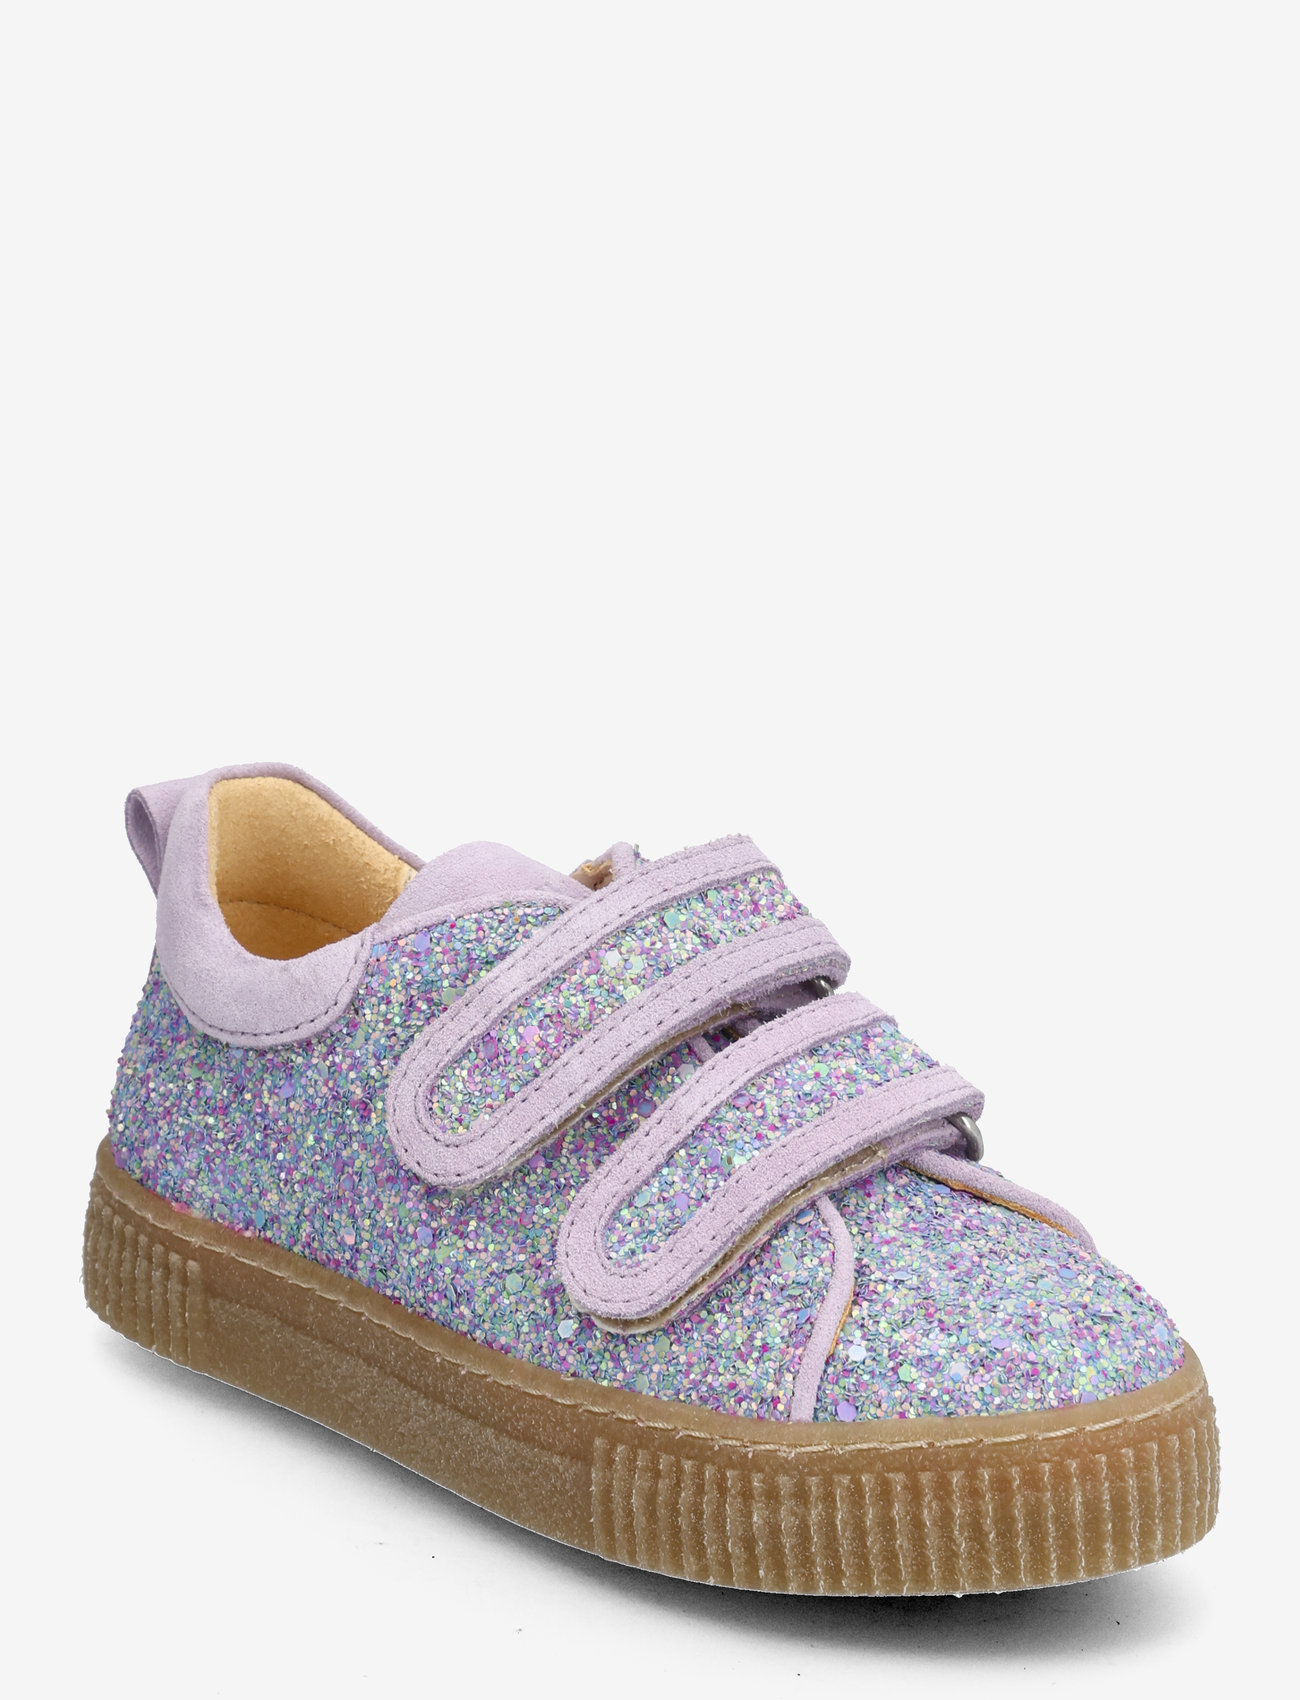 ANGULUS - Shoes - flat - with velcro - sommarfynd - 2753/2245 confetti glitter/lil - 0